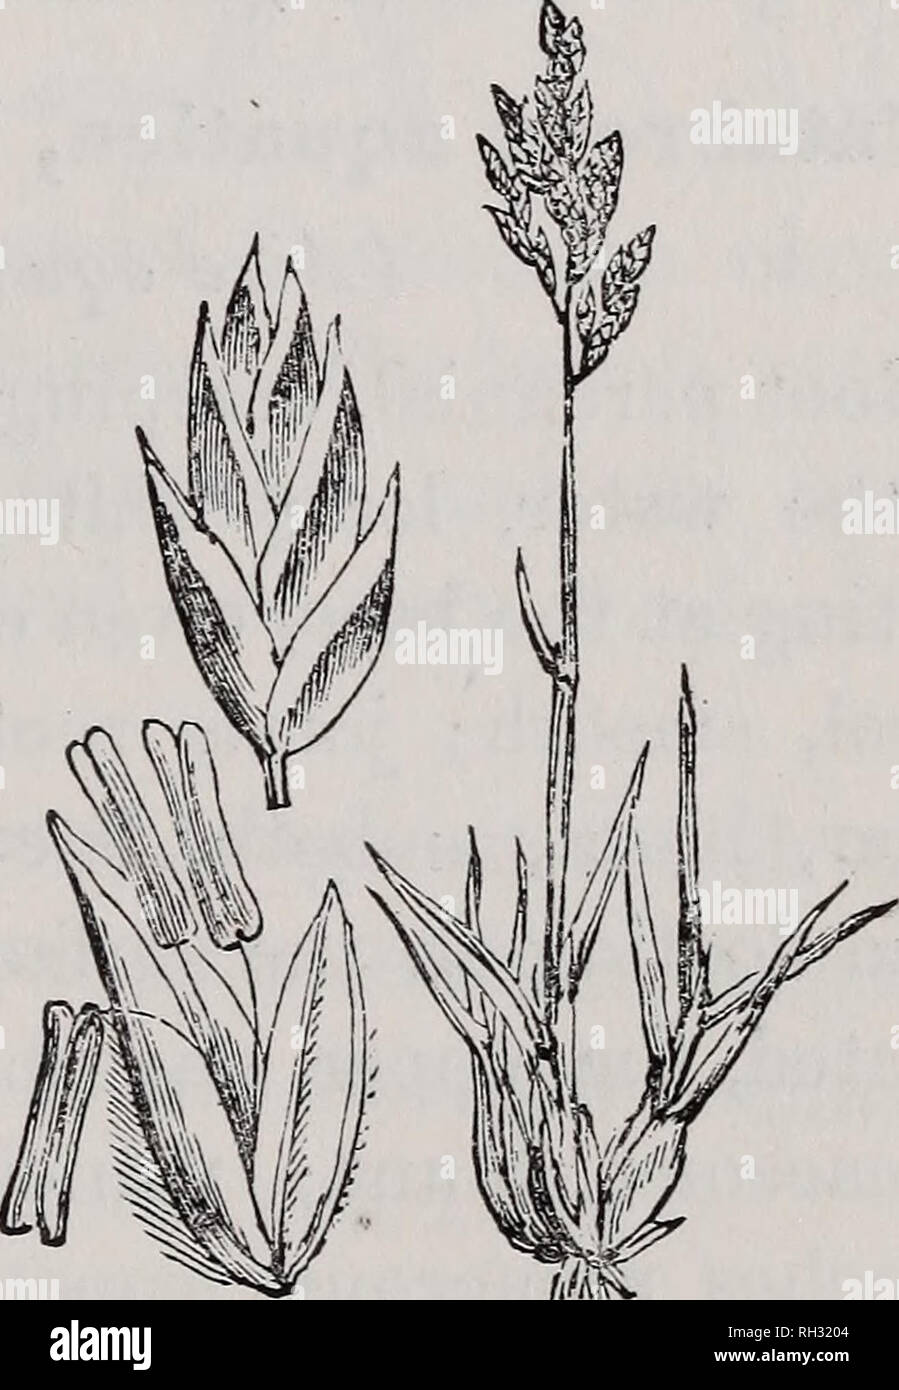 . British grasses : an introduction to the study of the Gramineae of Great Britain and Ireland. Grasses. POA. 285 longer than its leaf; ligule prominent and acute; panicle oblong, spike-like, or slightly spreading, only a little more than an inch long; raehis somewhat zigzag, branches rough, alternate, generally in pairs; spikelets ovate, green or purplish, three-or four-flowered ; outer glumes equal, three- ribbed, pointed, keeled; the keels toothed on the upper part, webbed; flowering glumes also pointed and keeled, five-ribbed, the central and marginal ribs hairy, the inter- mediate ones na Stock Photo